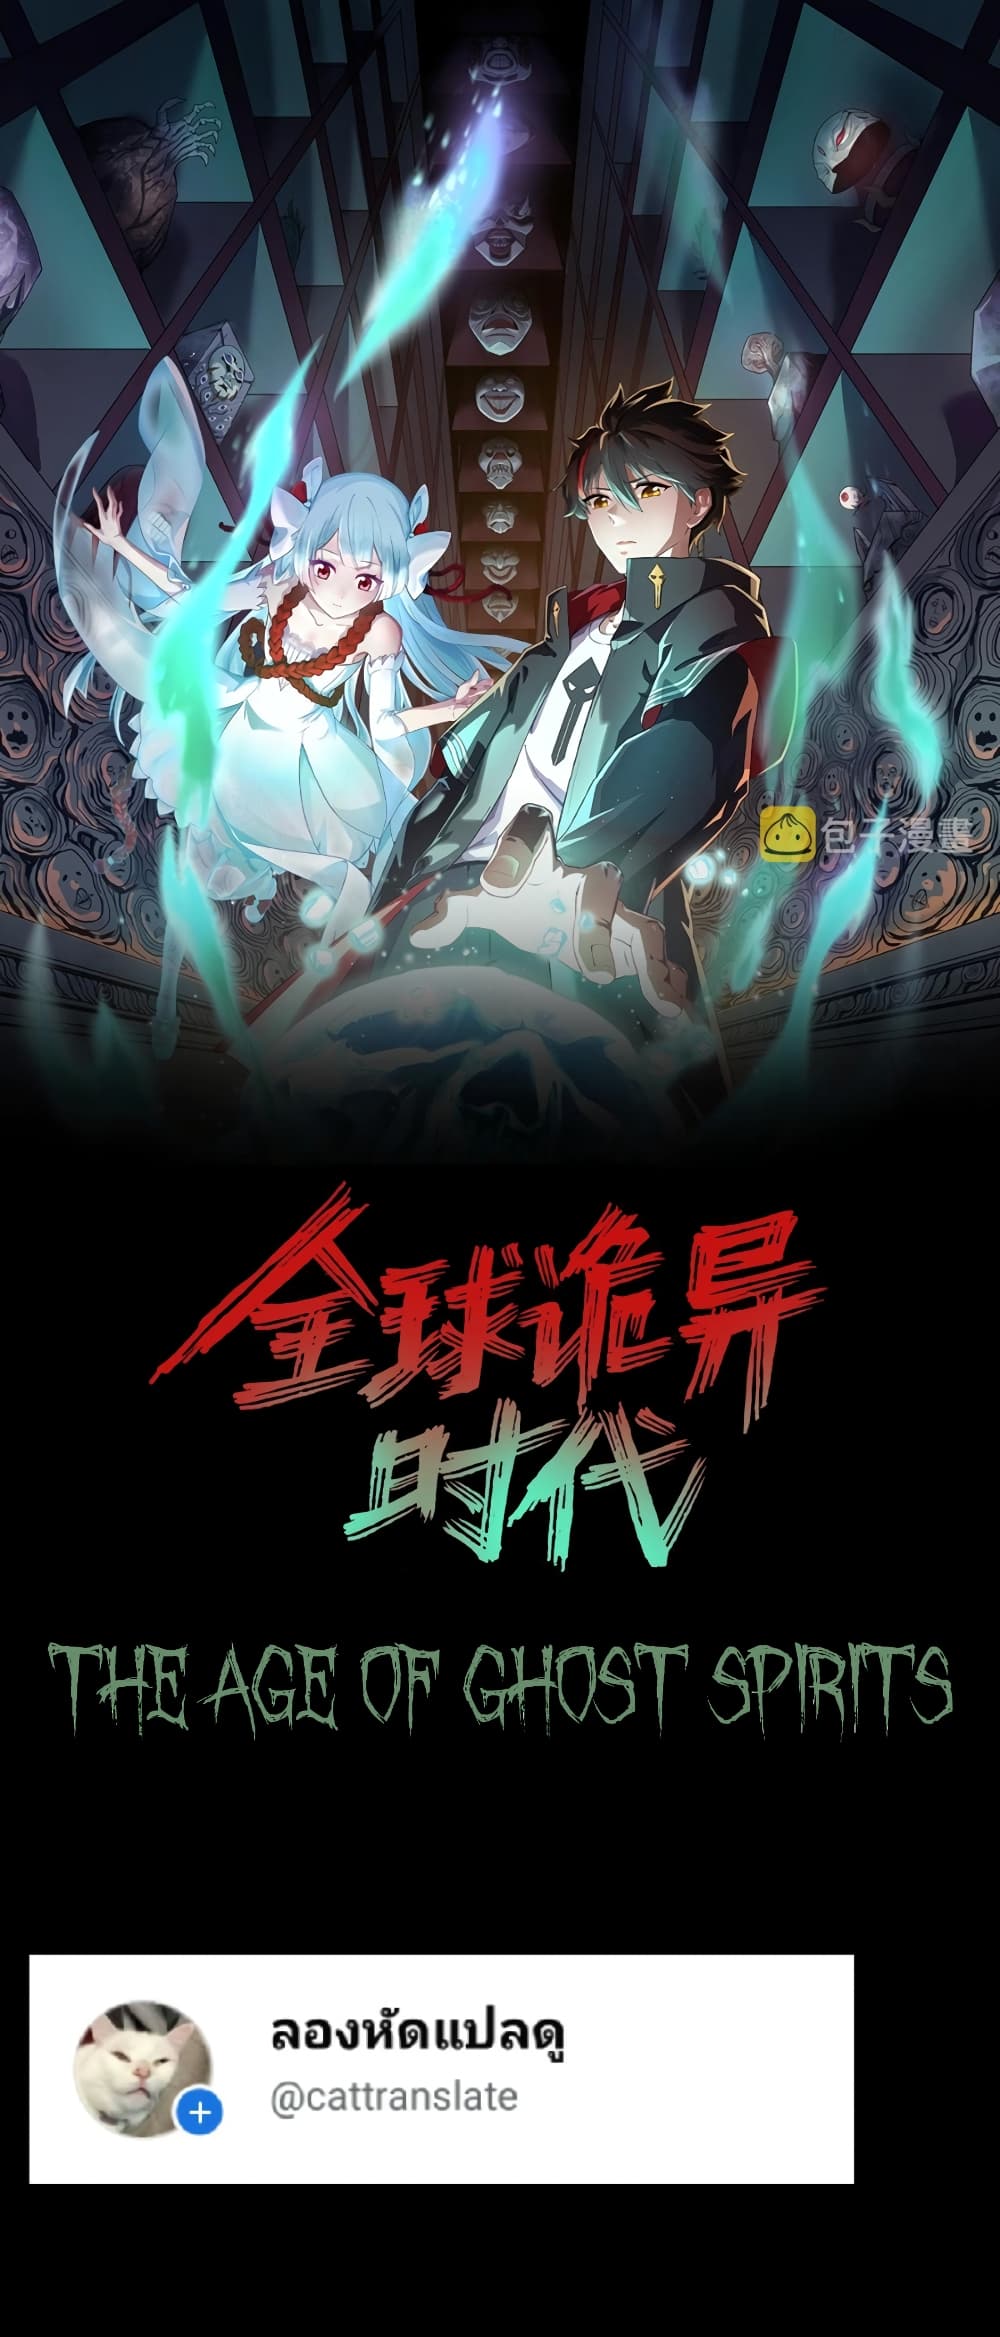 The Age of Ghost Spirits à¸à¸­à¸à¸à¸µà¹ 32 (1)